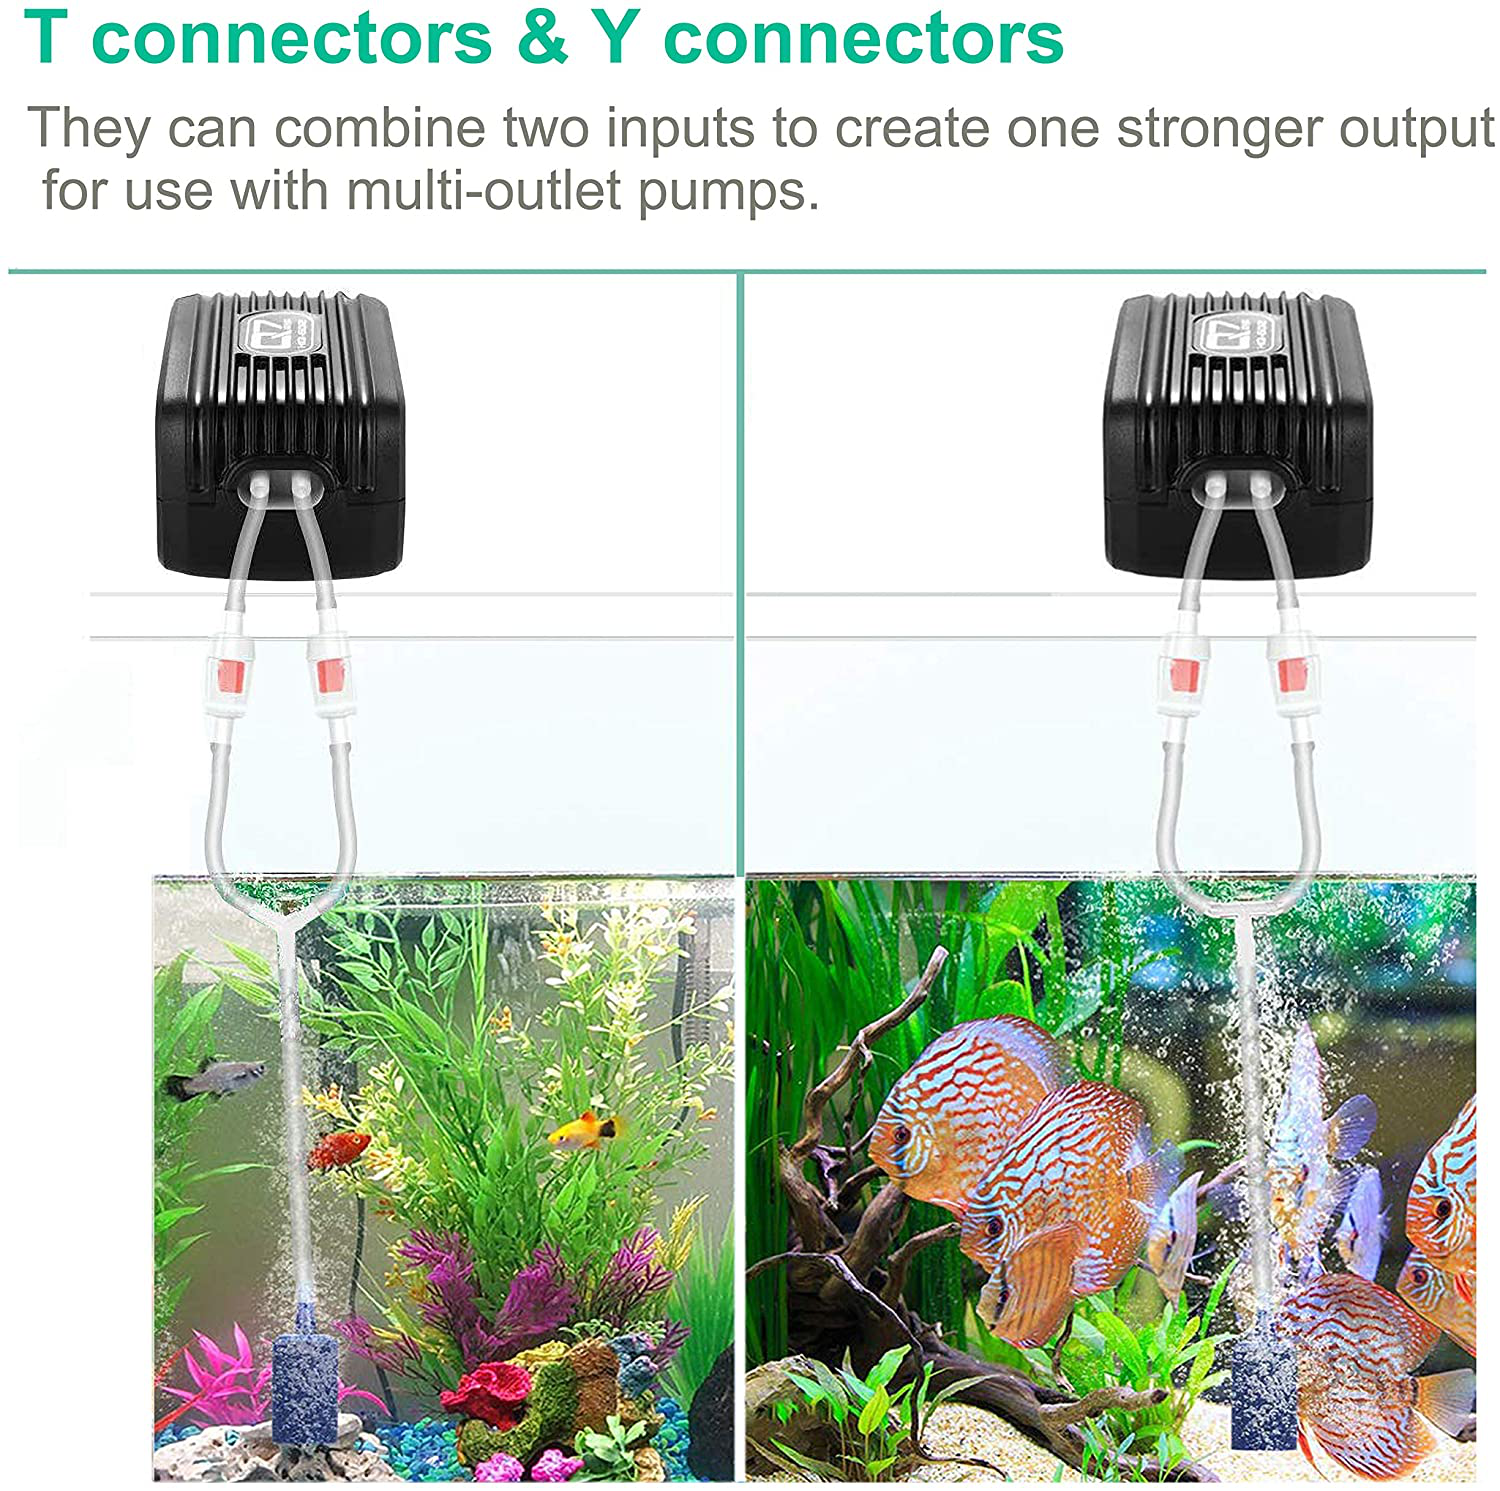 Dekago Aquarium Air Pump Accessories Kit with 80 Inch Standard Clear Airline Tubing, Air Stones, Check Valves, Suction Cups and Connectors for Fish Tank